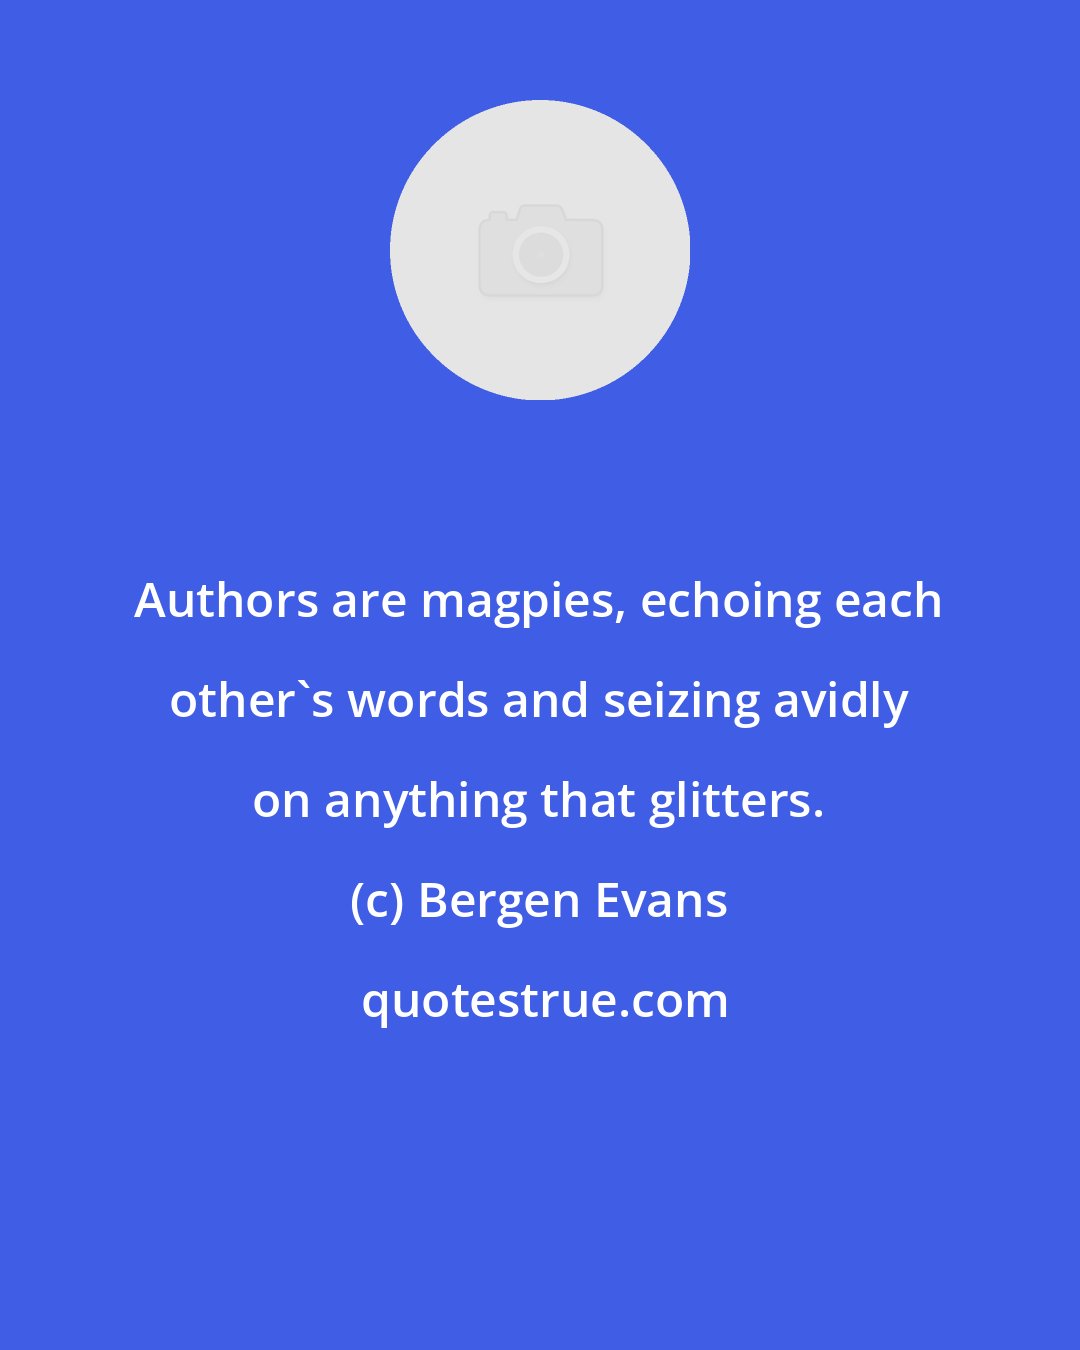 Bergen Evans: Authors are magpies, echoing each other's words and seizing avidly on anything that glitters.